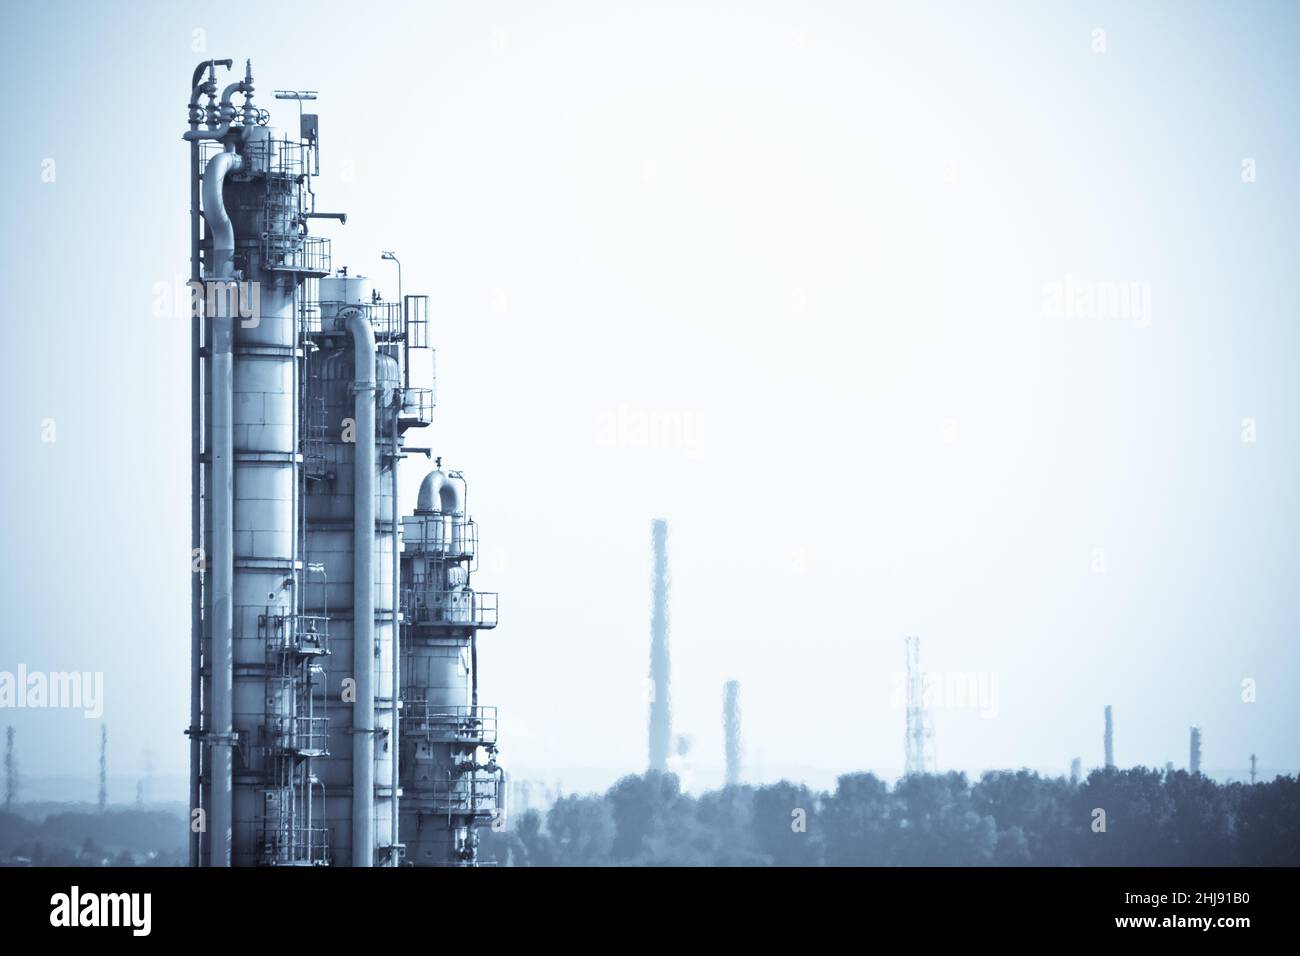 Photoartistic representation of a chemical plant with three distillation columns. Stock Photo